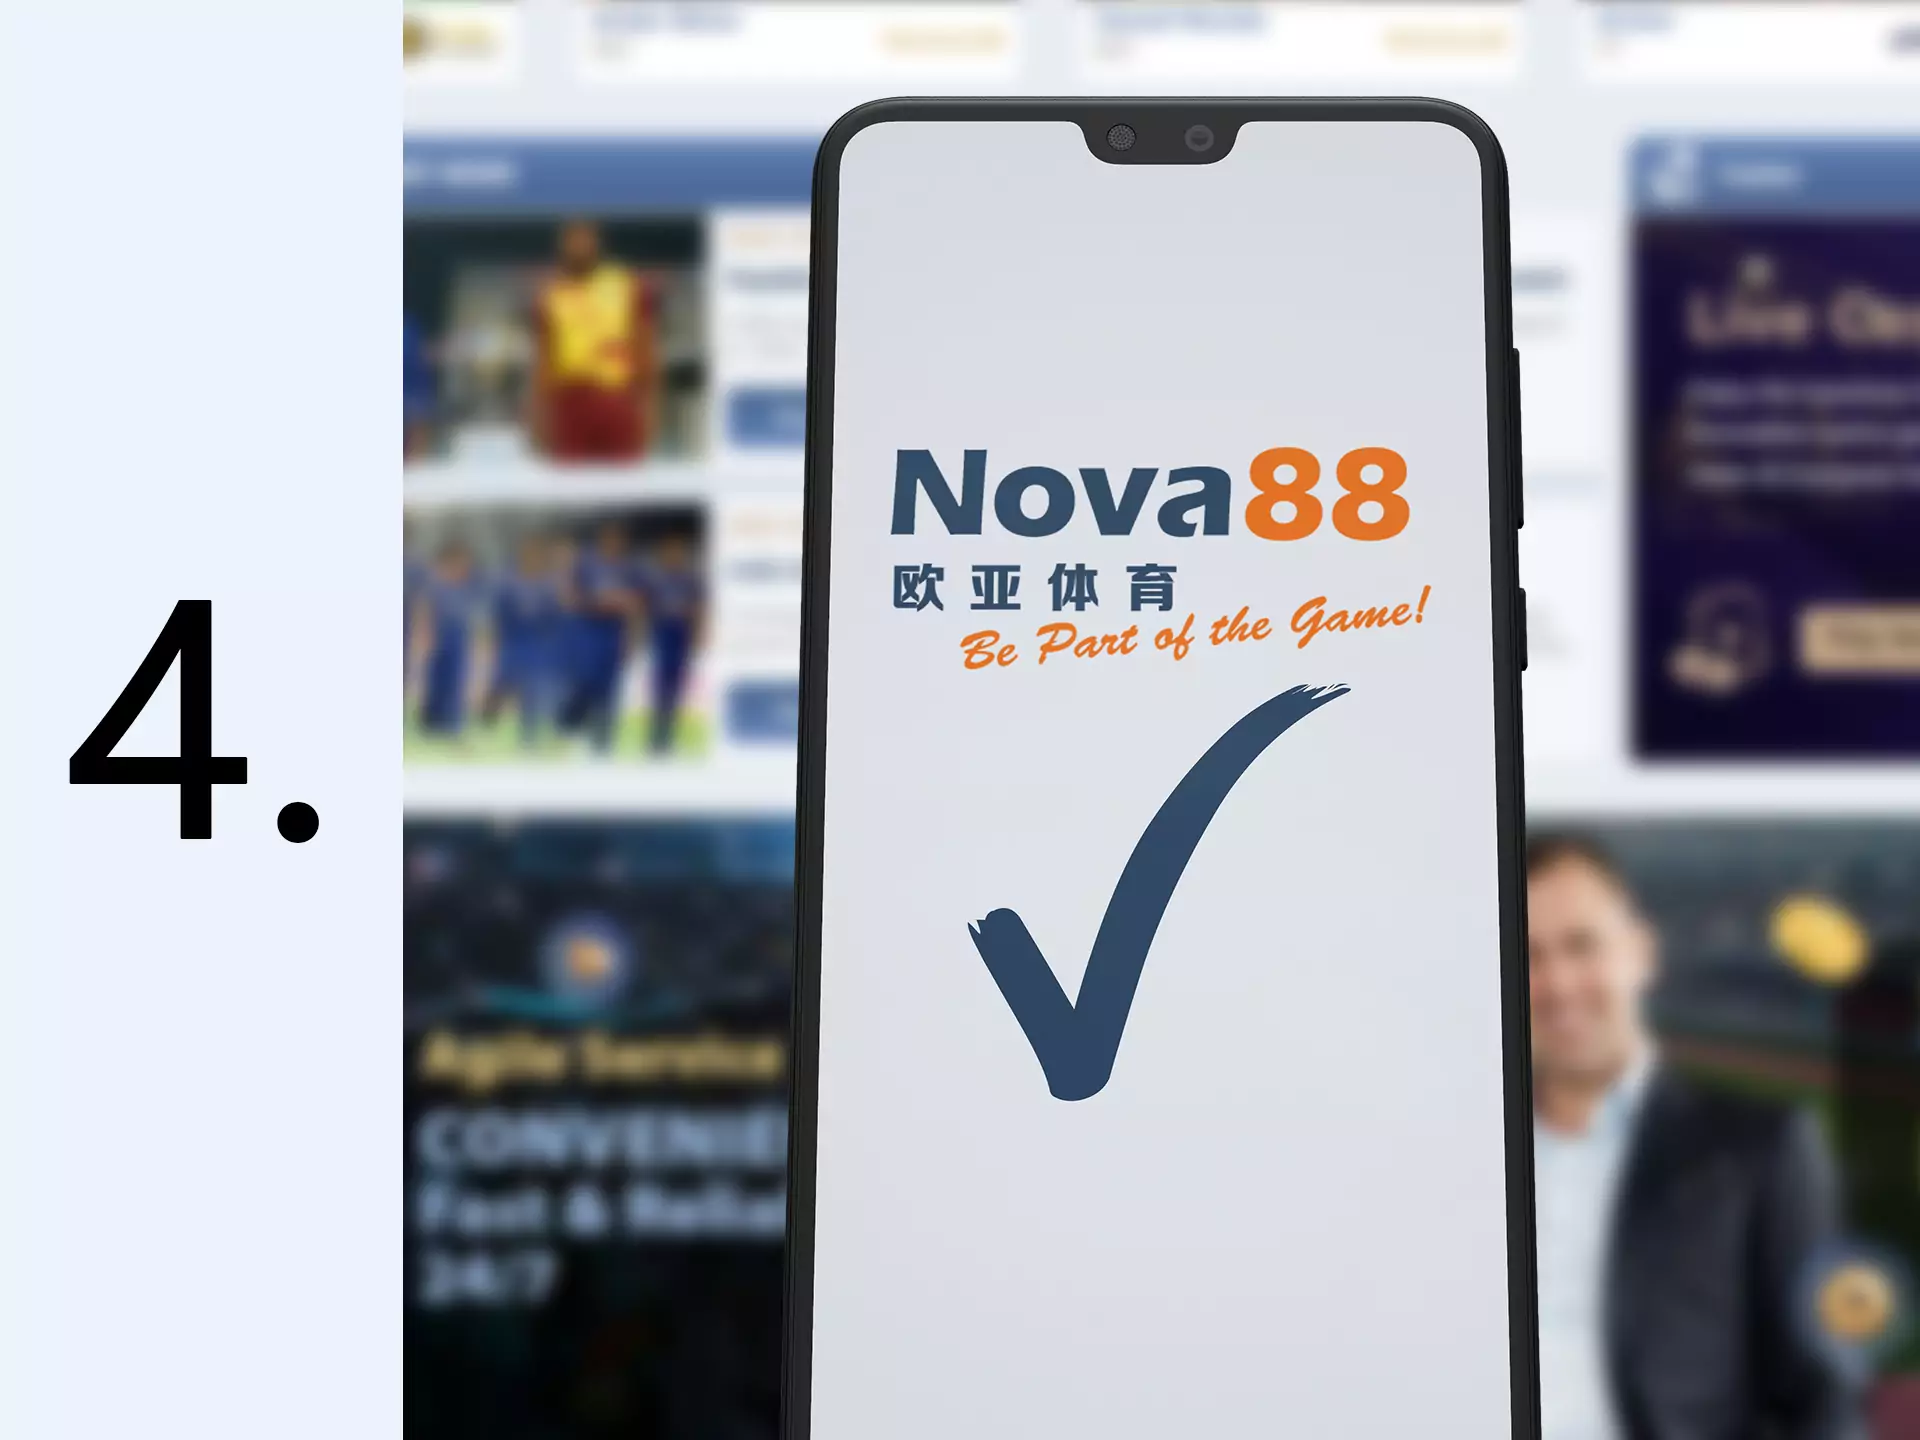 After succesfull download of Nova88 app you can start installation.